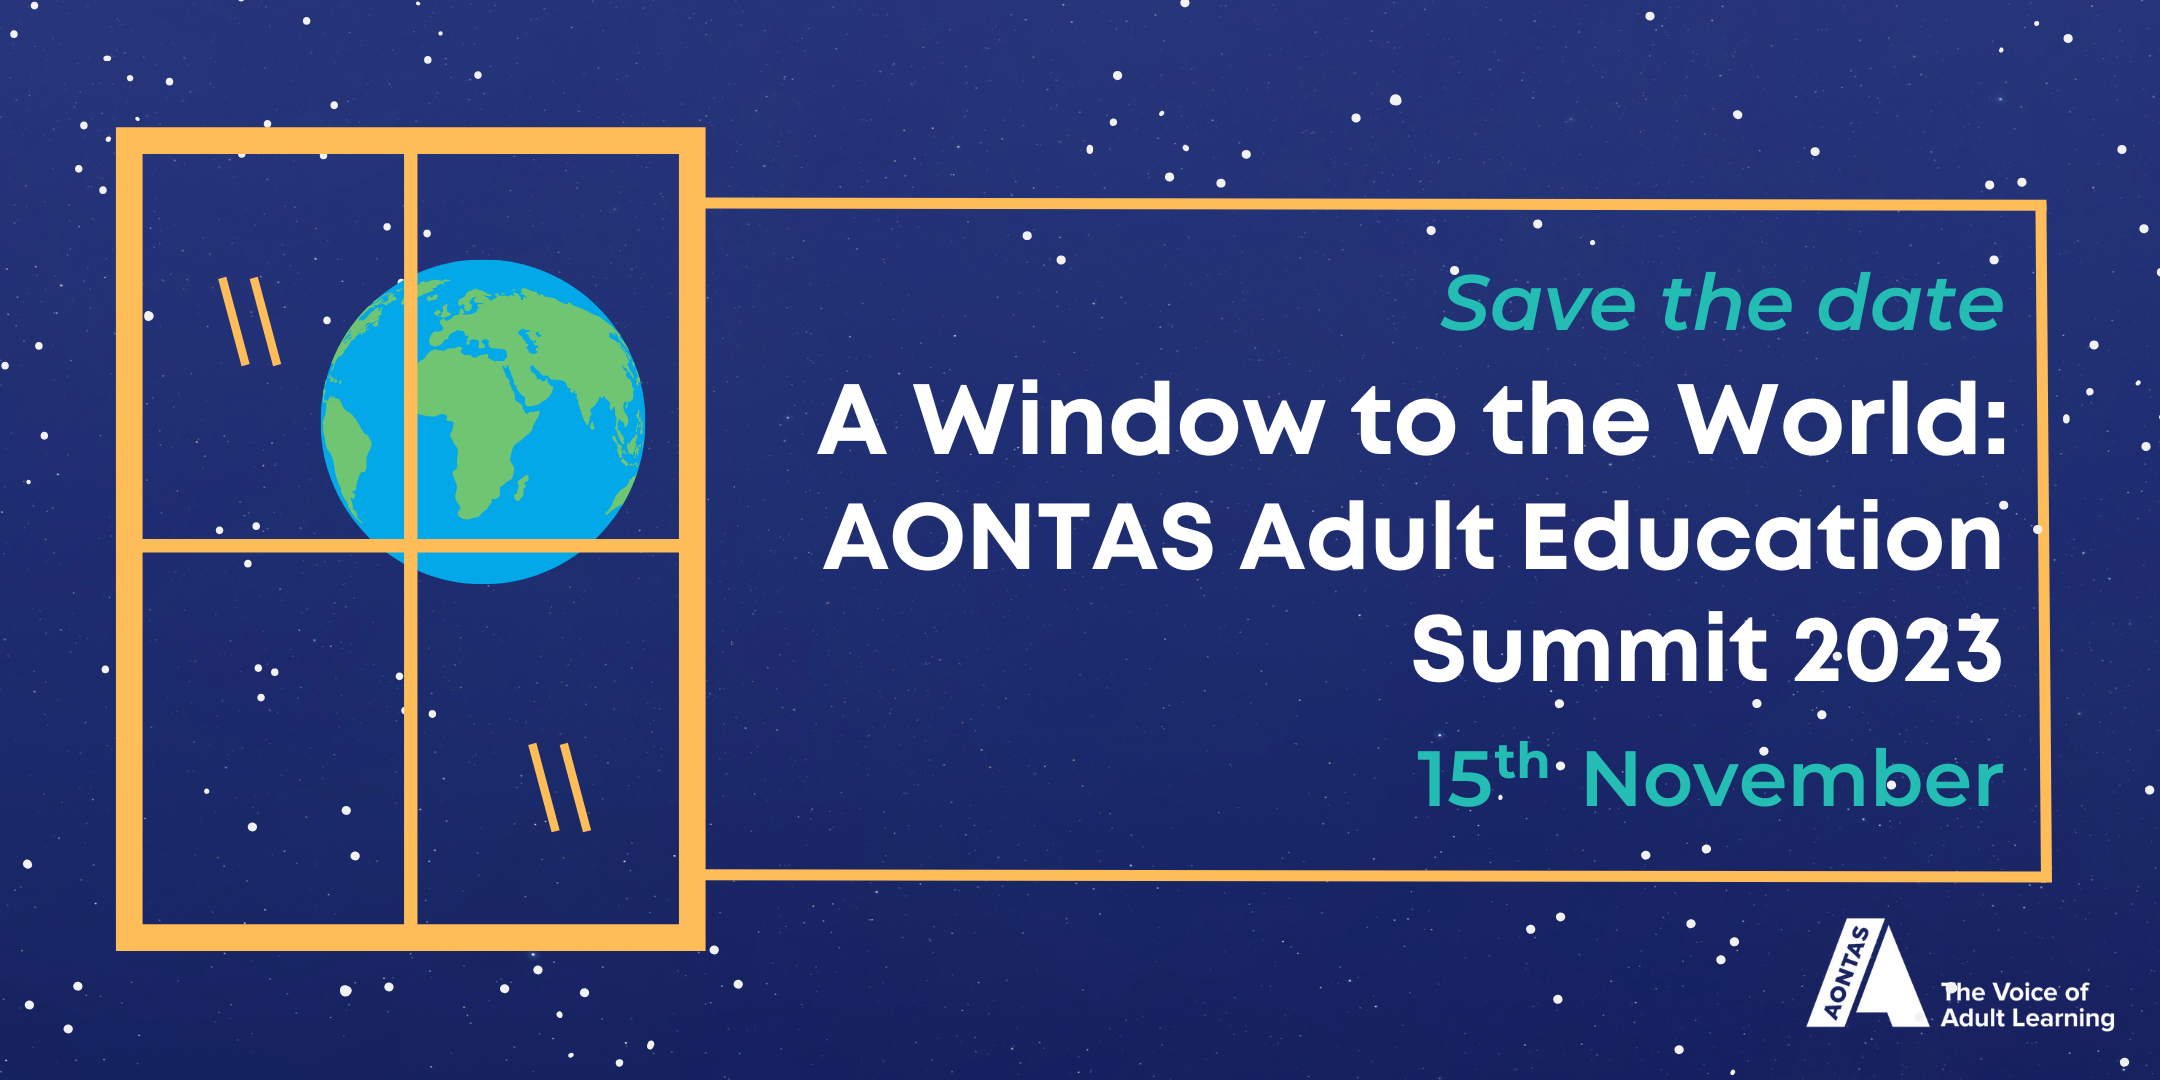 Image shows a window and the earth, with stars in the background. Text reads Save the Date: A window to the world: AONTAS Adult Education Summit  2023 15th November 